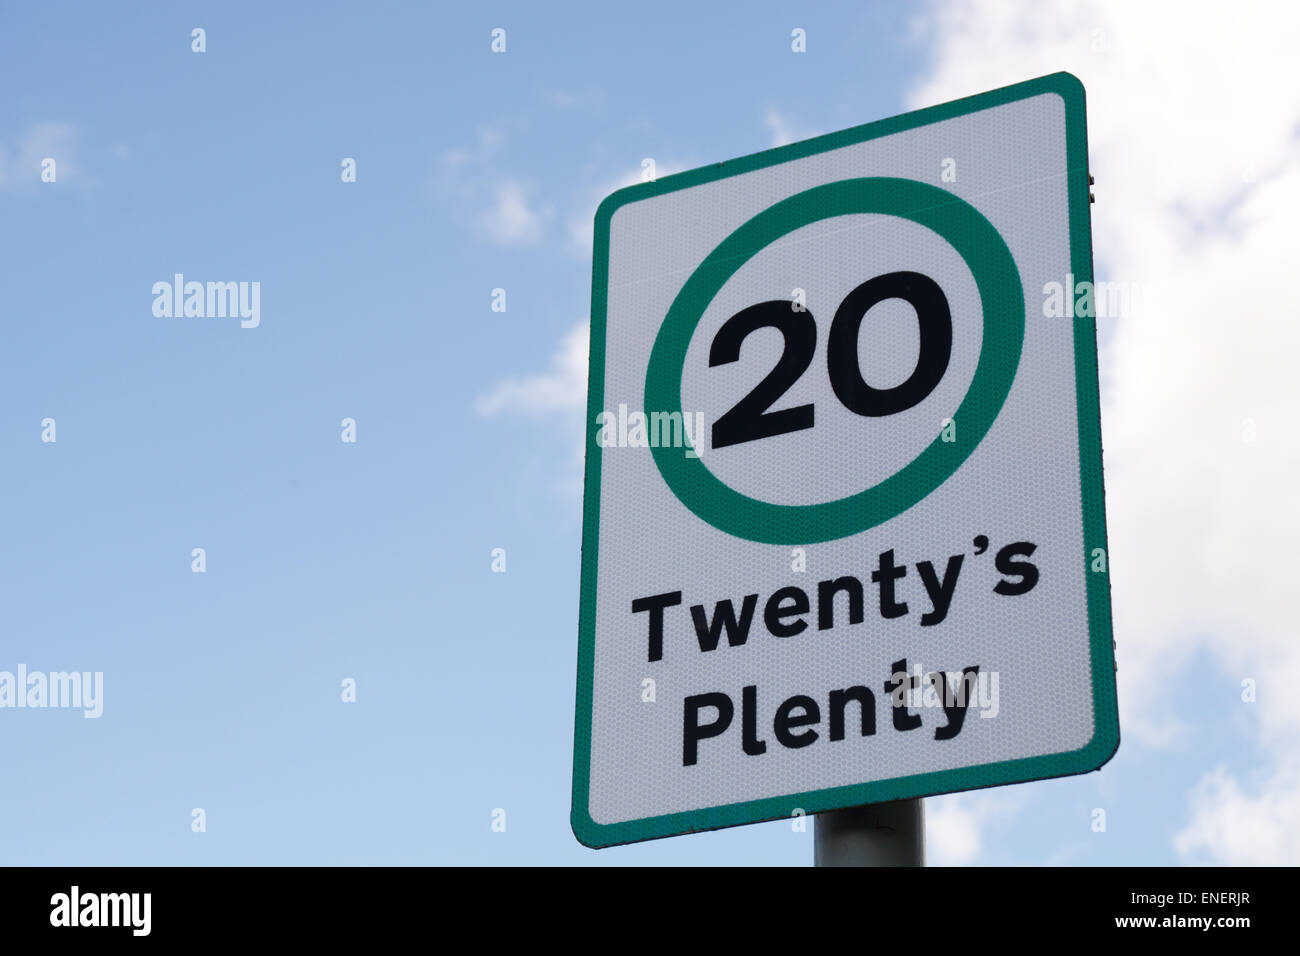 Twenty's plenty road sign against blue sky with white clouds on a sunny day Stock Photo